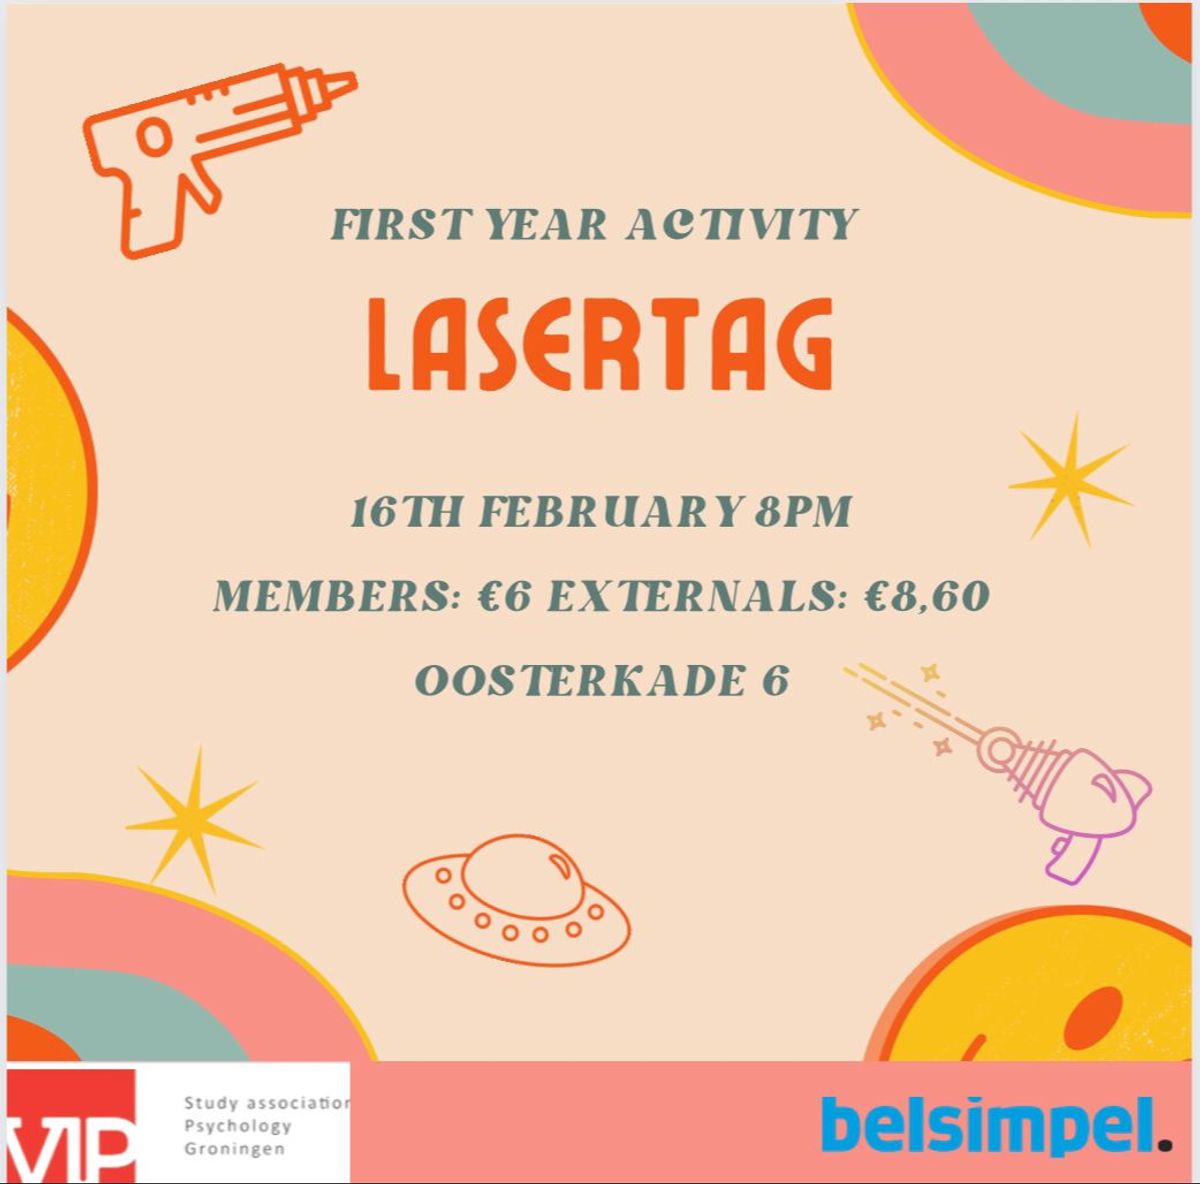 First Year Activity: Laser Tag